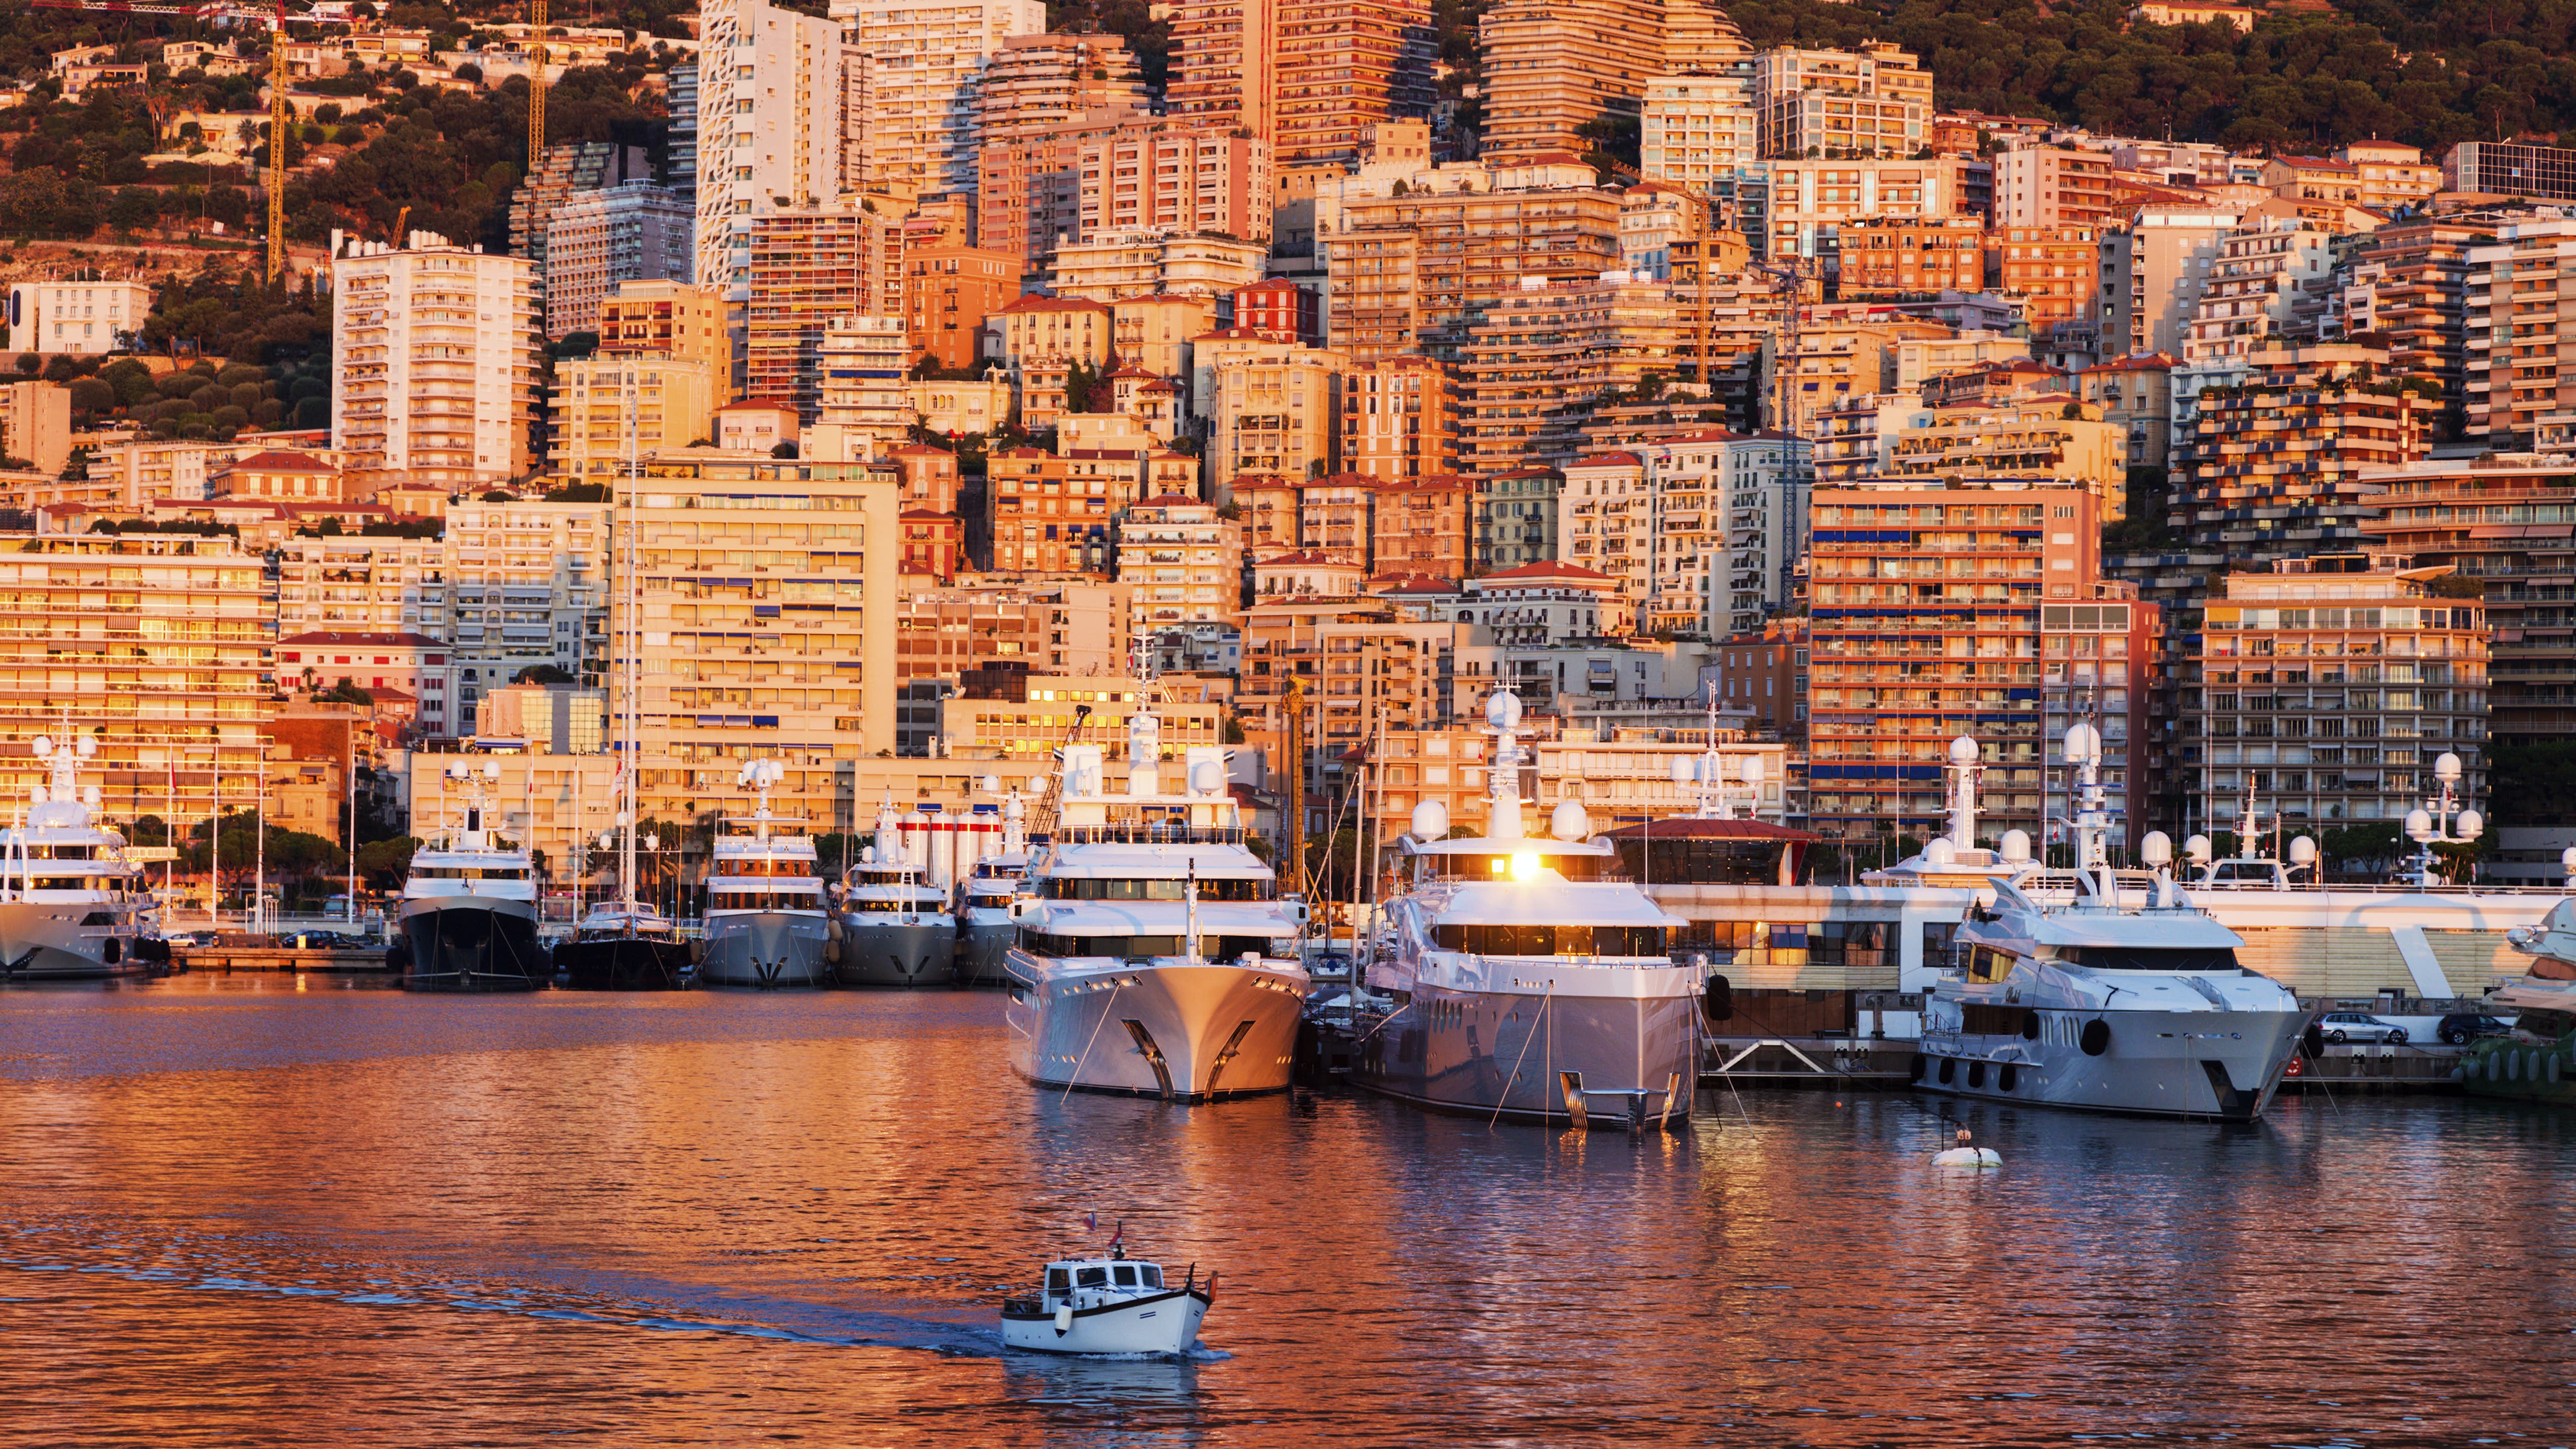 A breathtaking view of Port Hercule in Montecarlo bathed in the warm hues of a sunset, with magnificent superyachts on display during the Monaco Yacht Show.